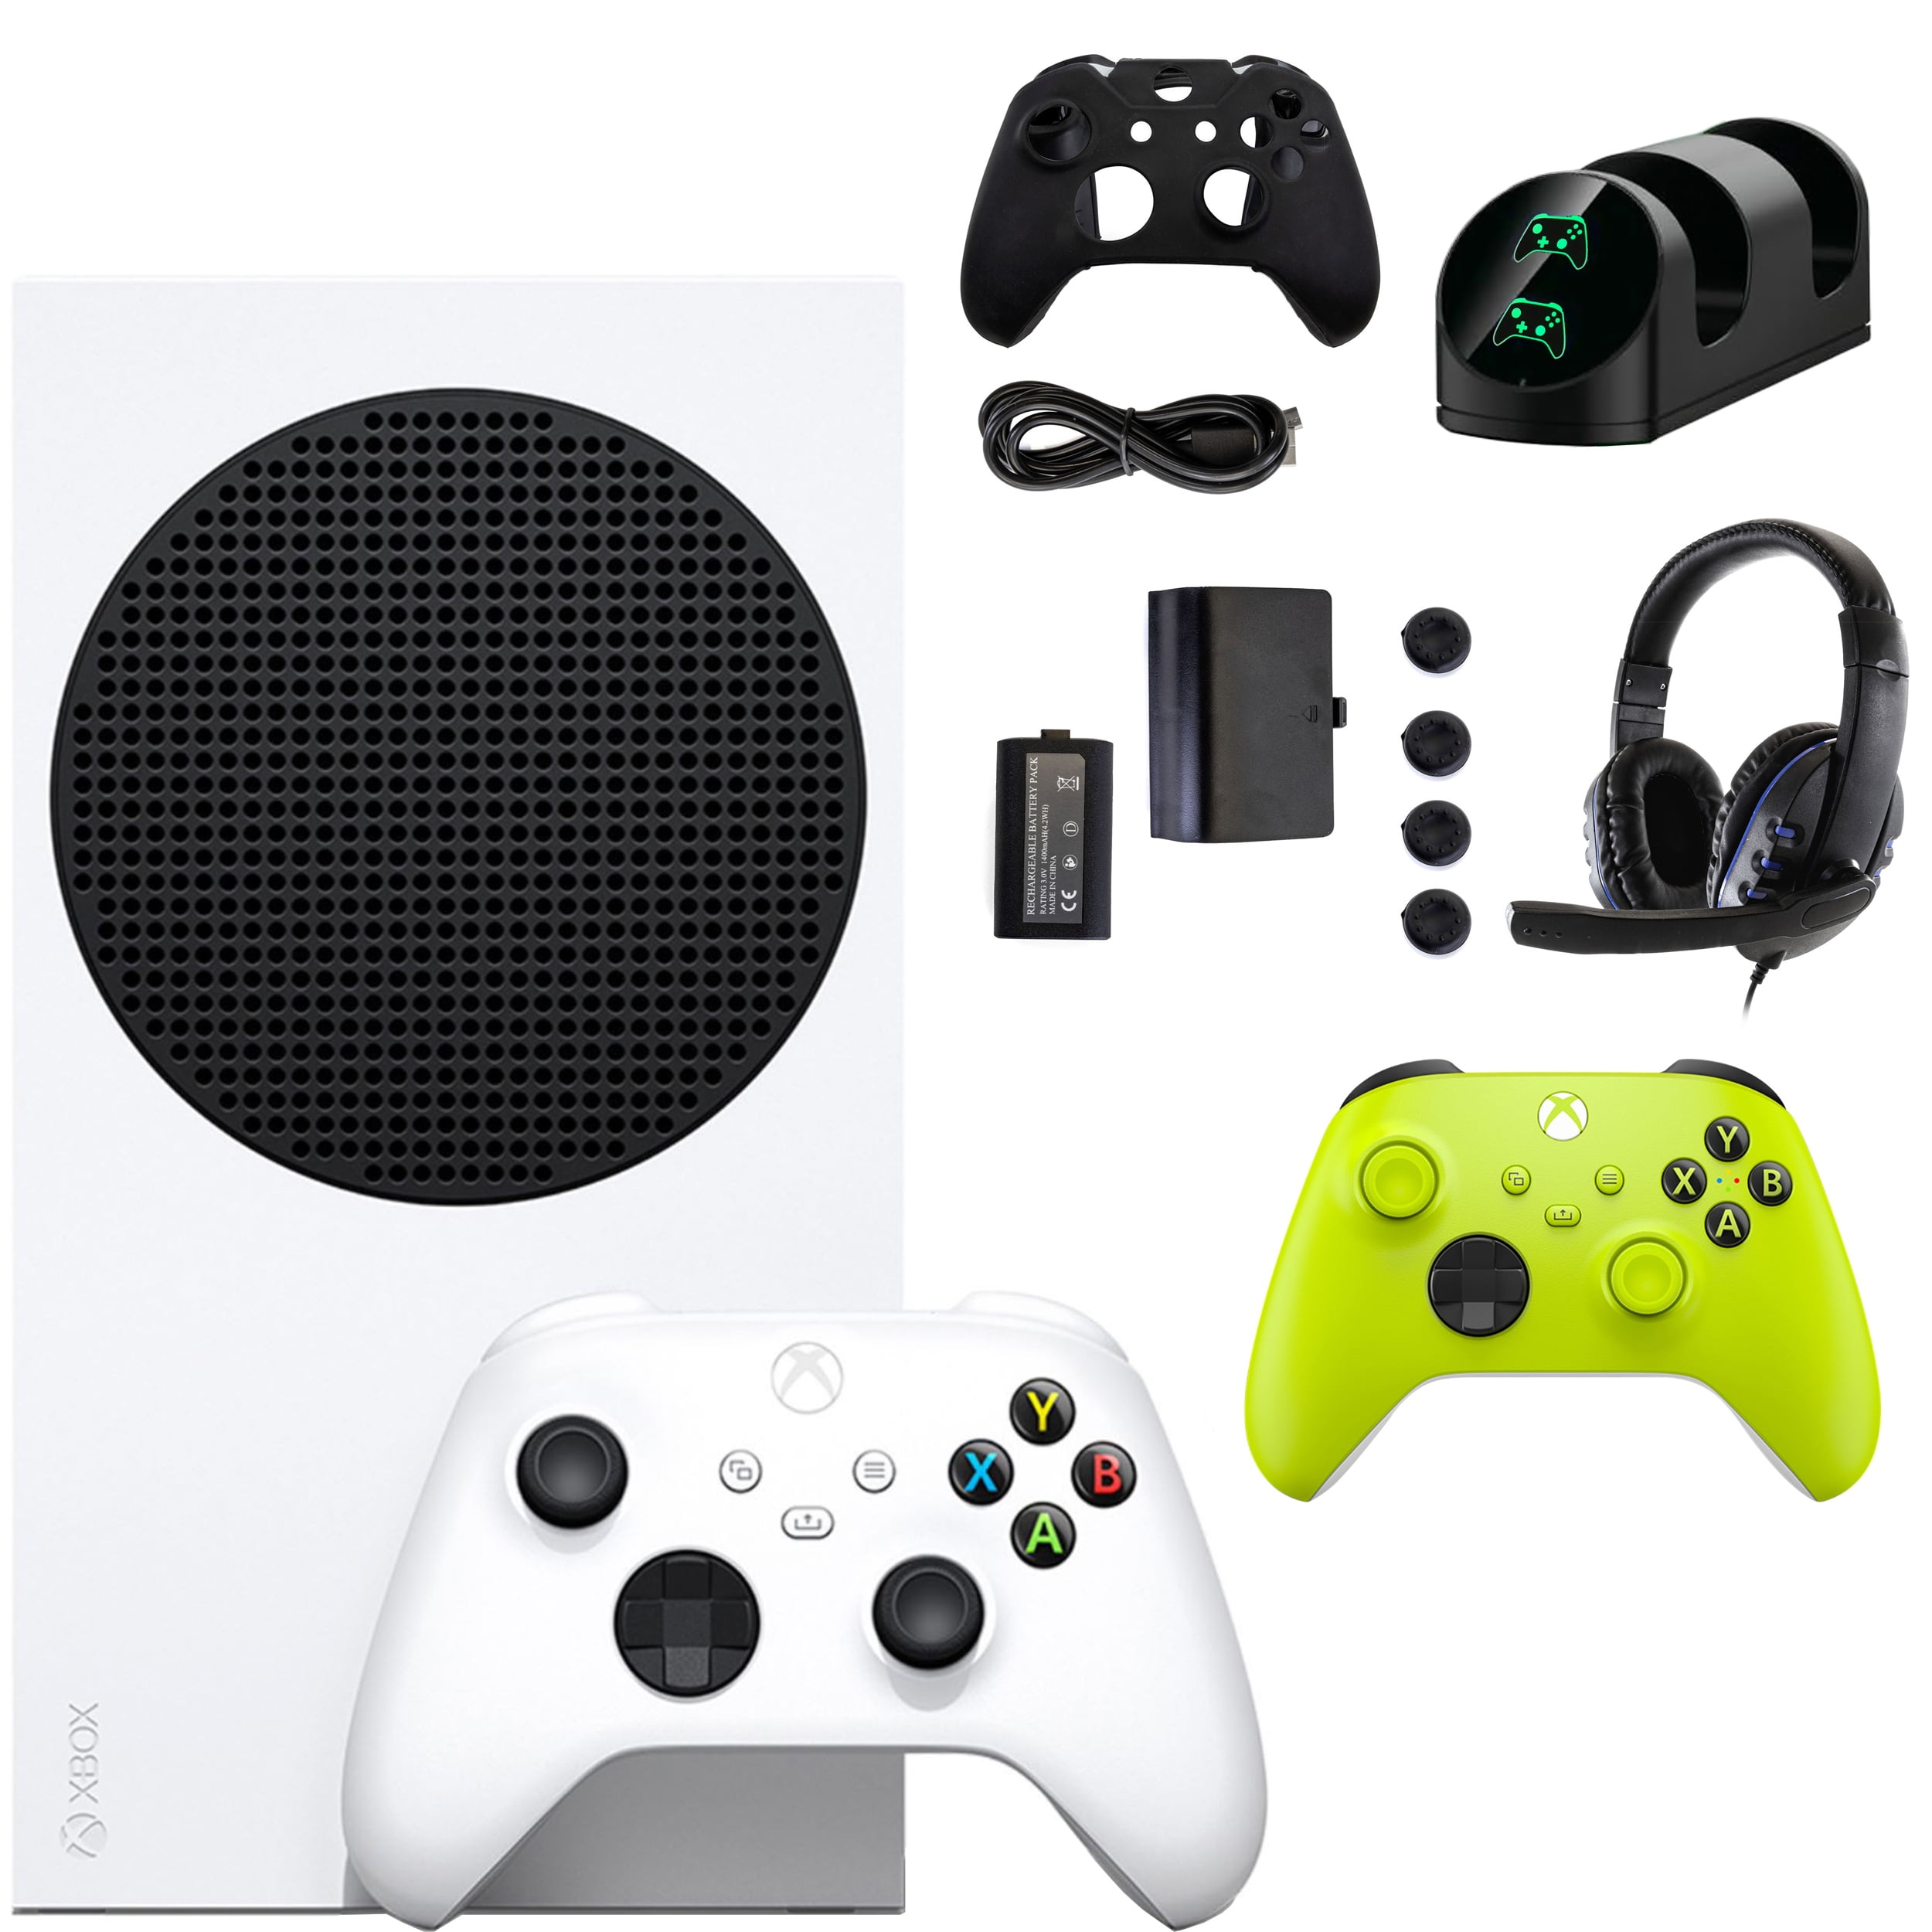 Microsoft Xbox Series X Console with Accessories Kit